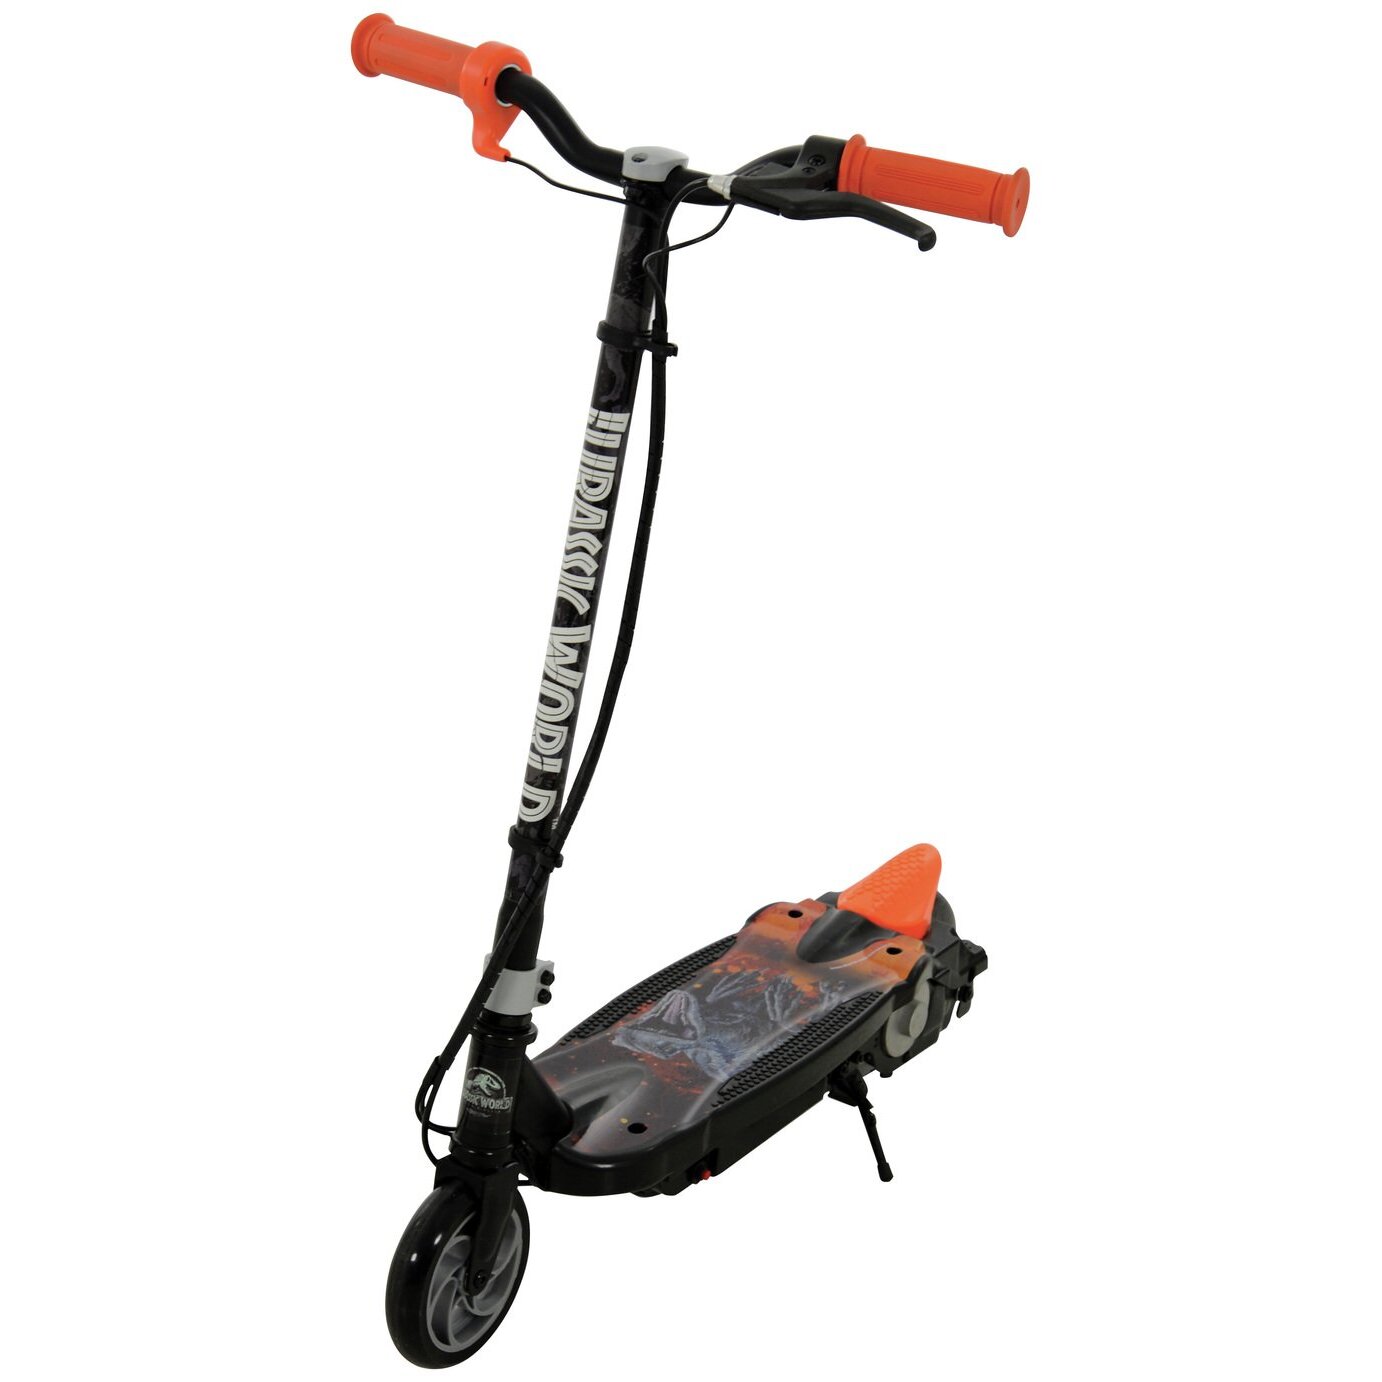 Jurassic World 12V Electric Scooter